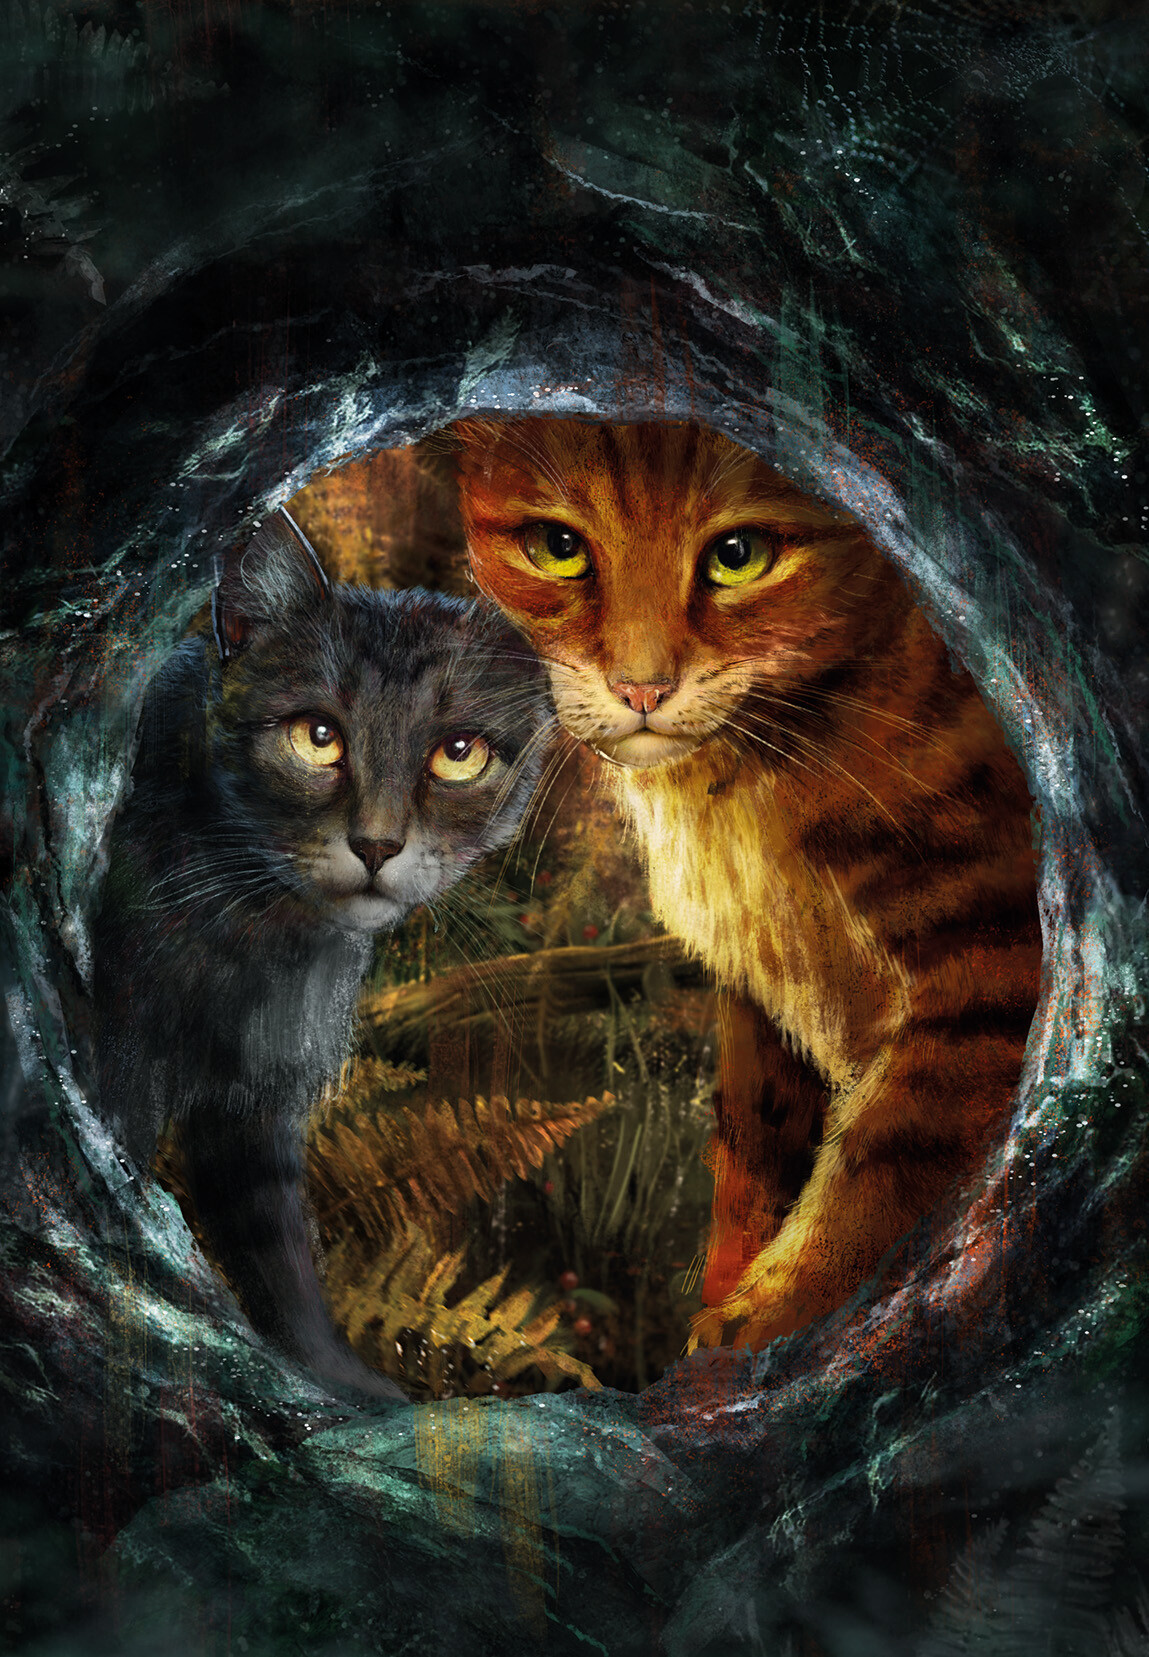 Warrior Cats Name generator Frosted_Flake - Illustrations ART street